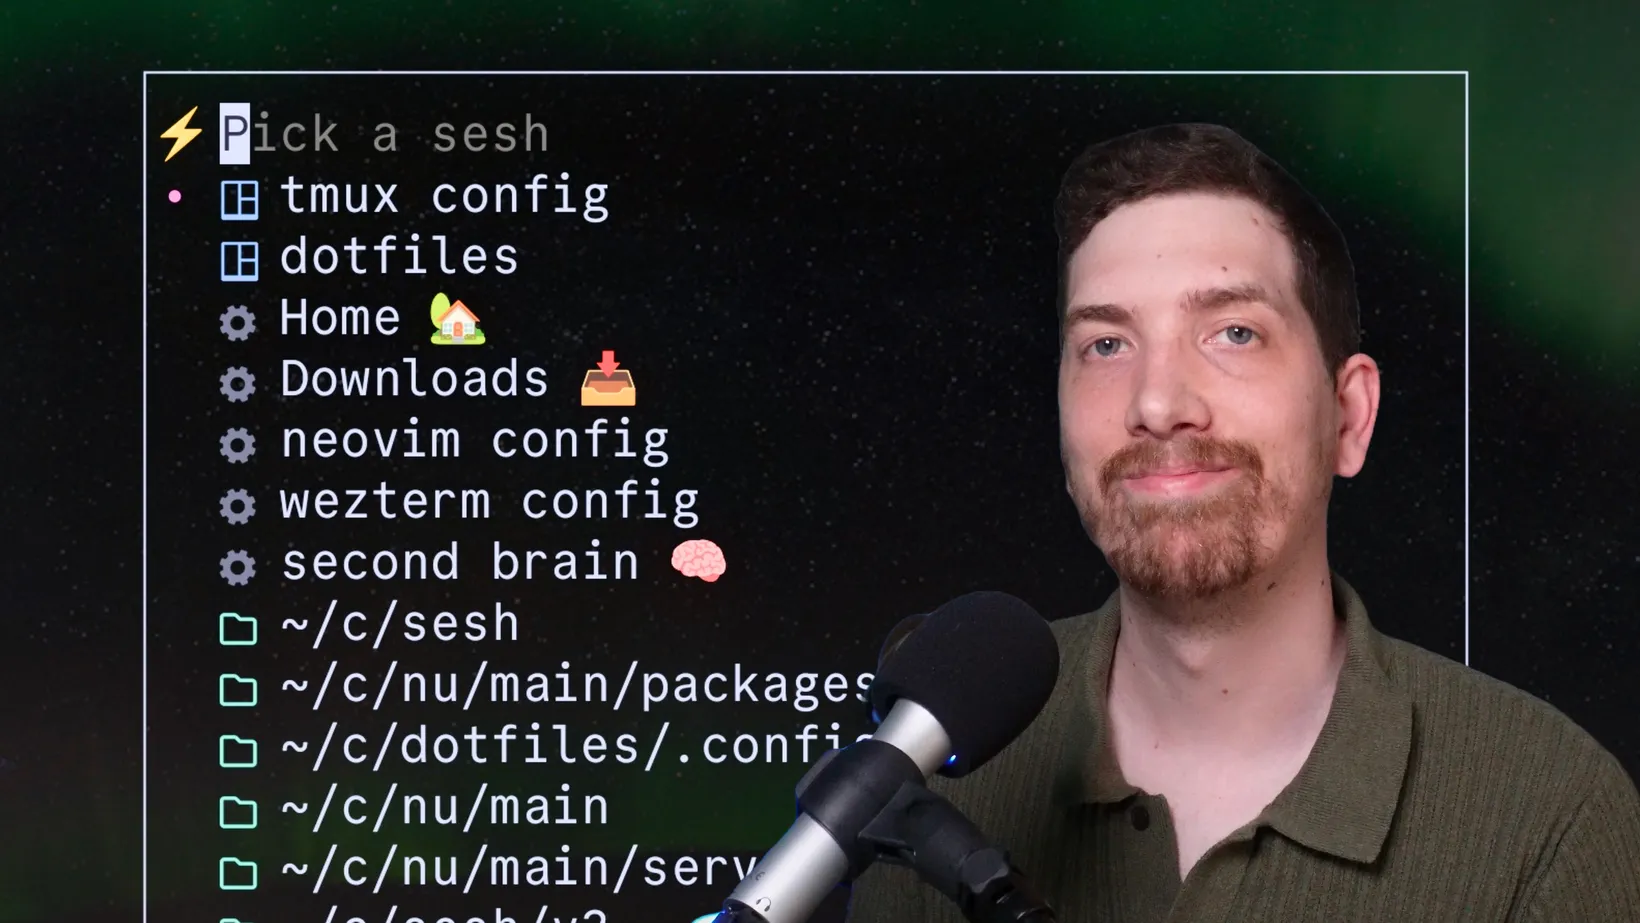 Smart tmux sessions with sesh hero